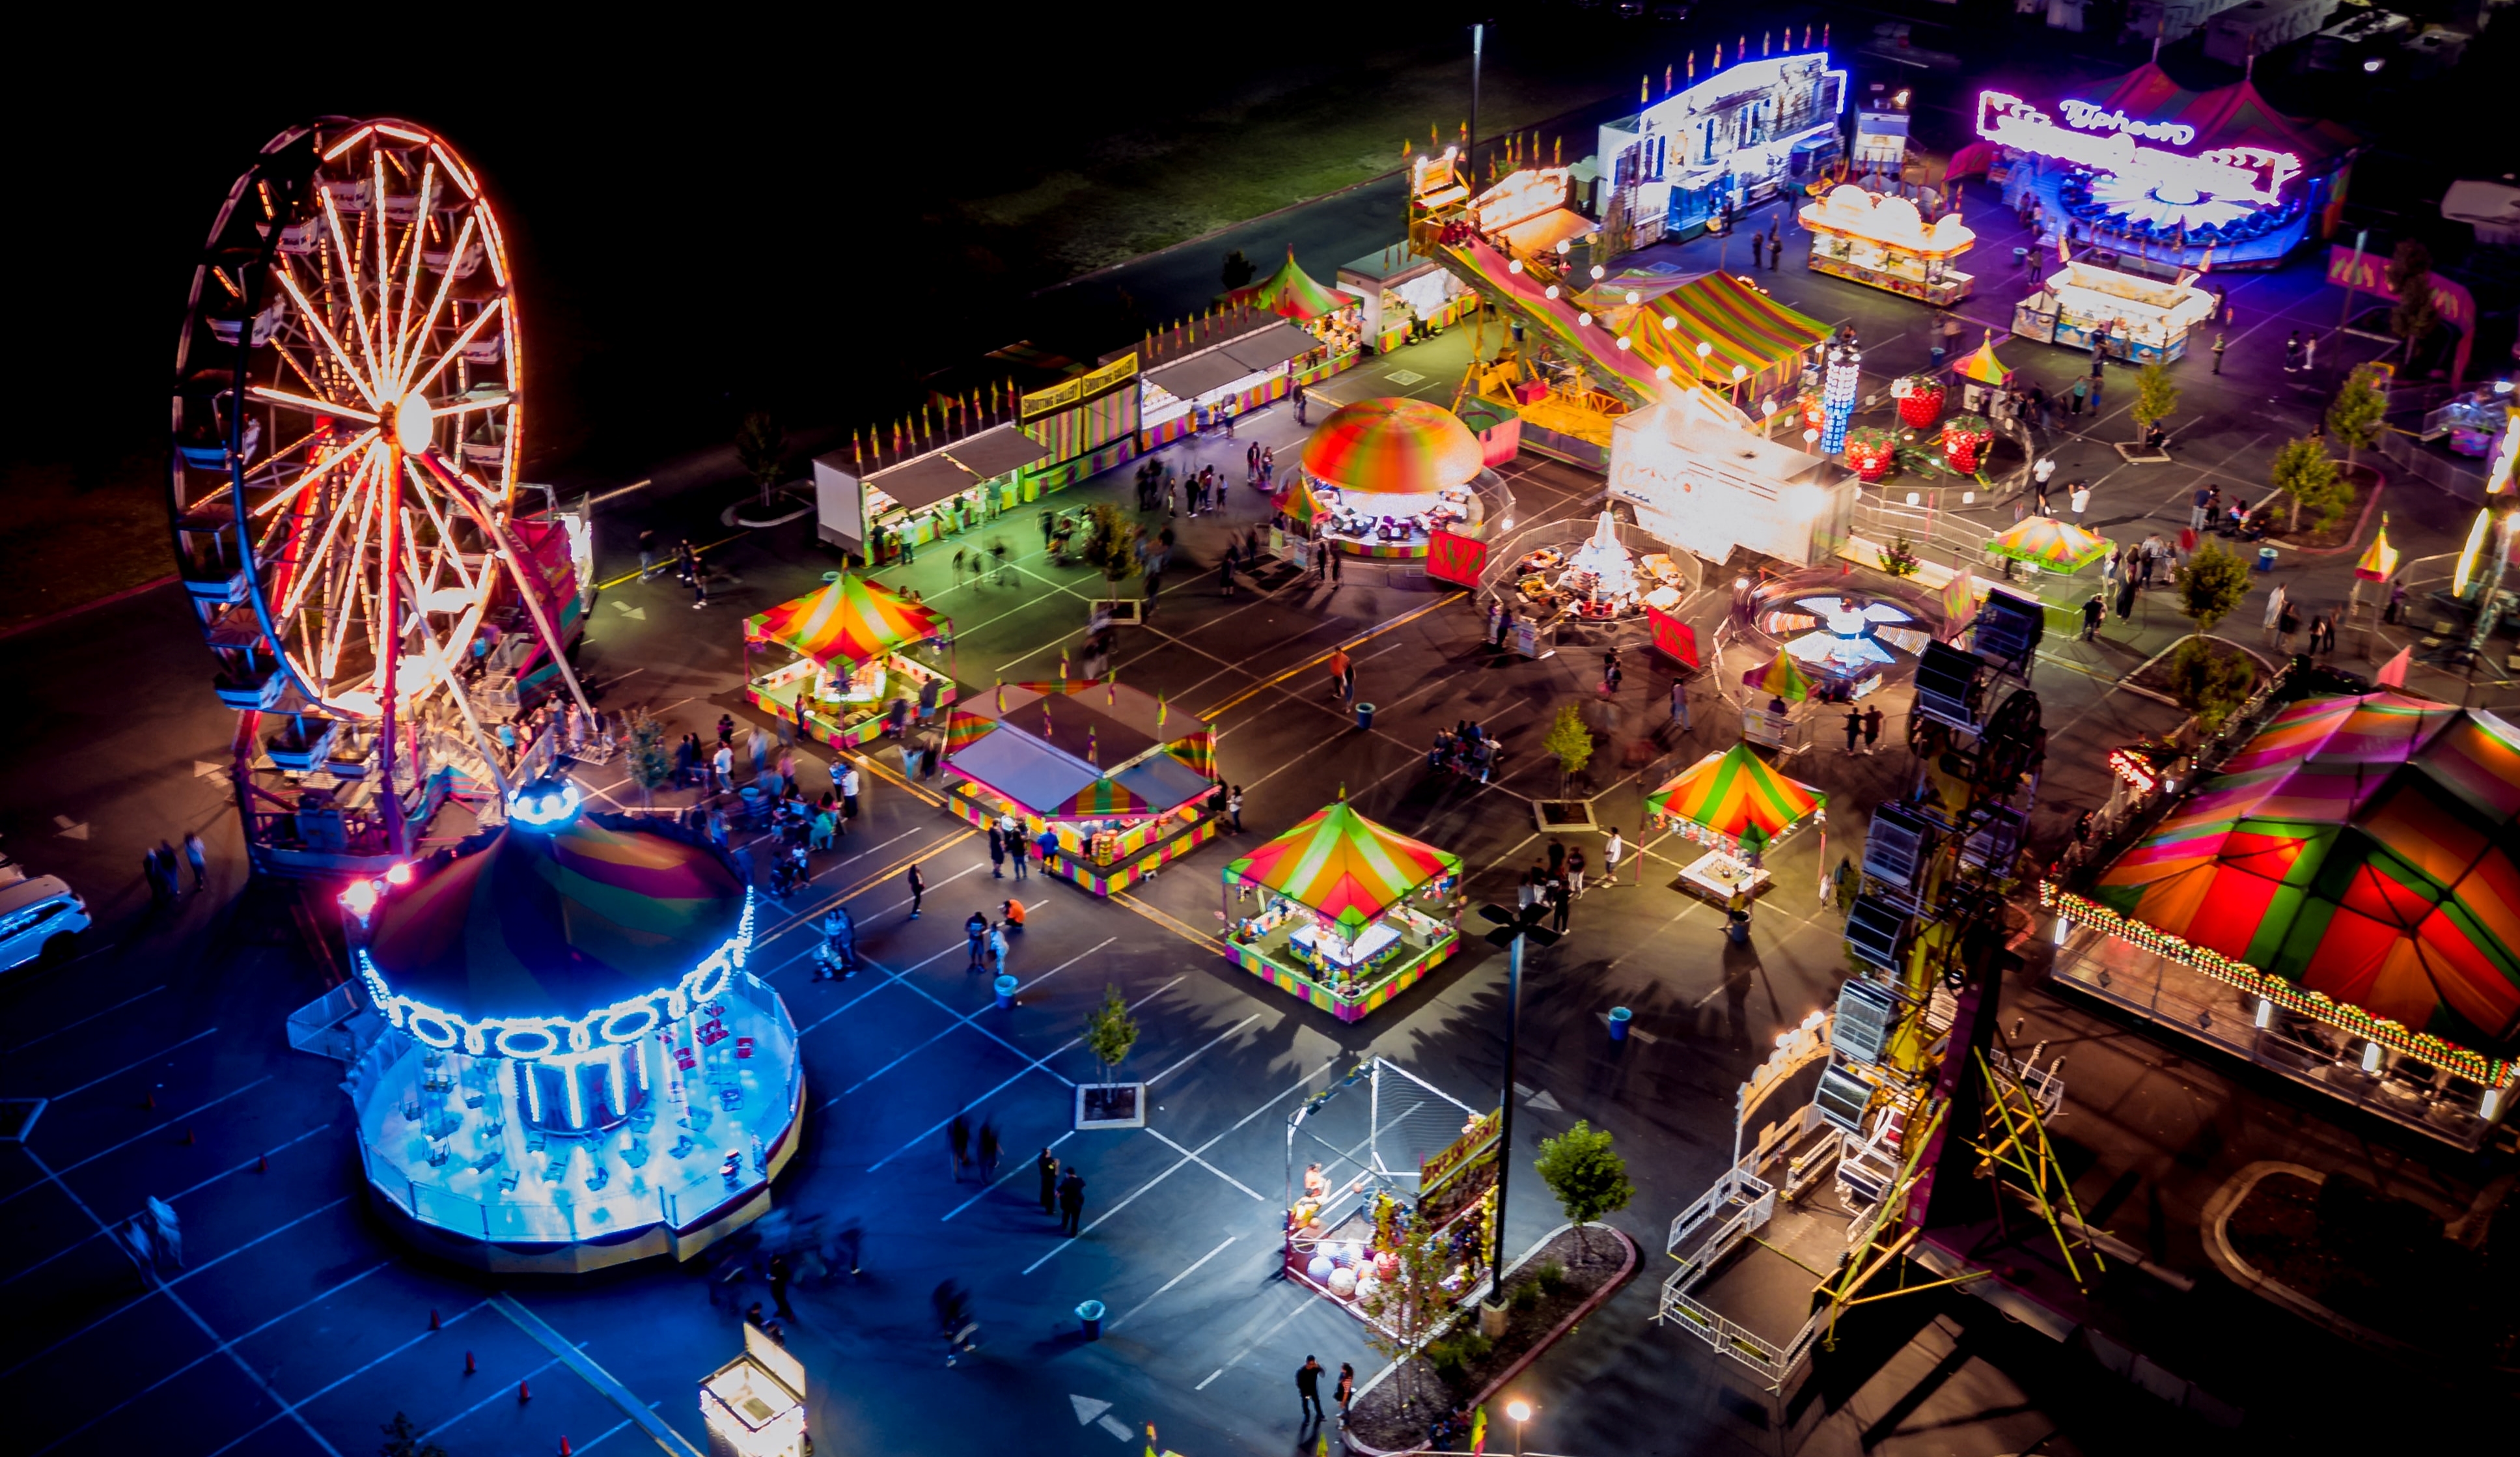 fair, festival, things to do, lights, nightlife, people, carnival, 